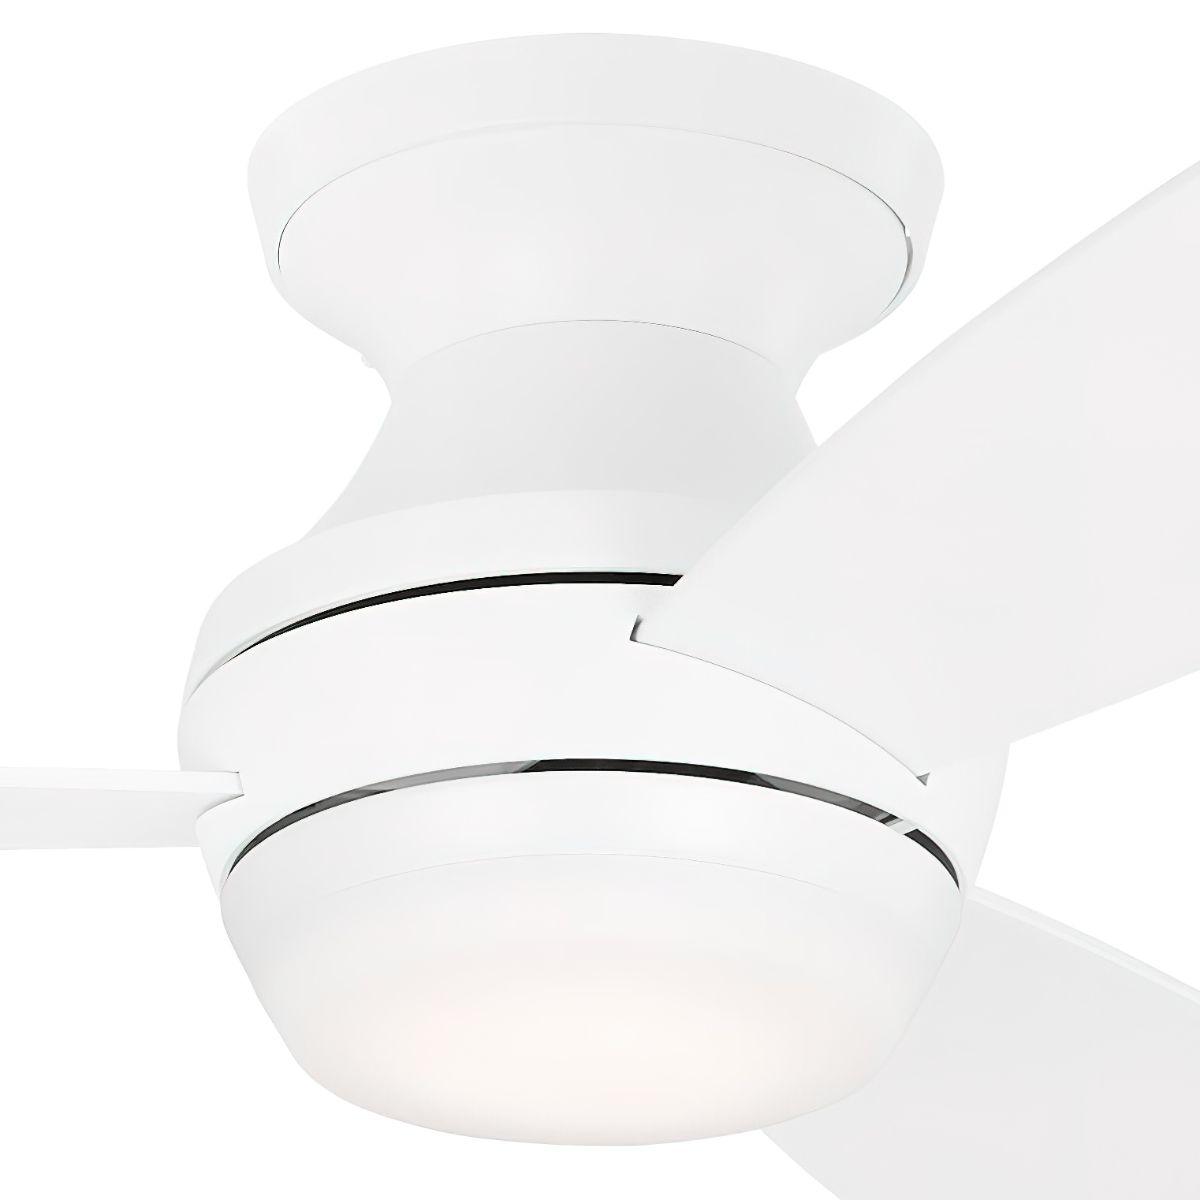 Ikon 44 In. Flush Mount Ceiling Fan With Light And Remote